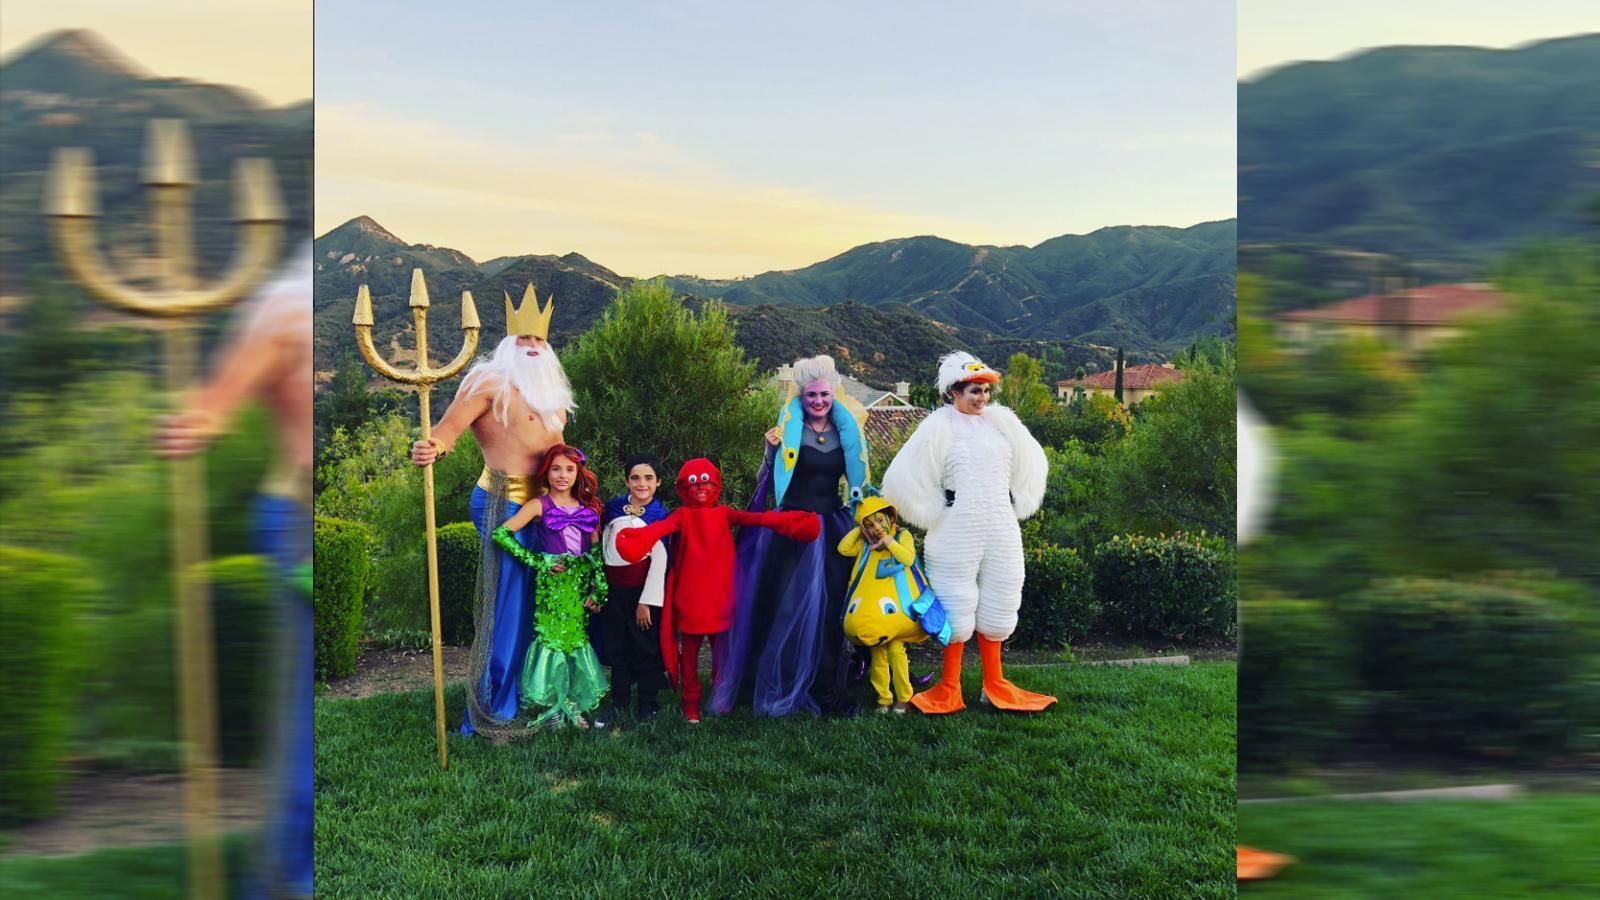 
                <strong>Andrew Whitworth</strong><br>
                Auch der Offensive Tackle der Los Angeles Rams, Andrew Whitworth, feierte Halloween mit seiner Familie.
              